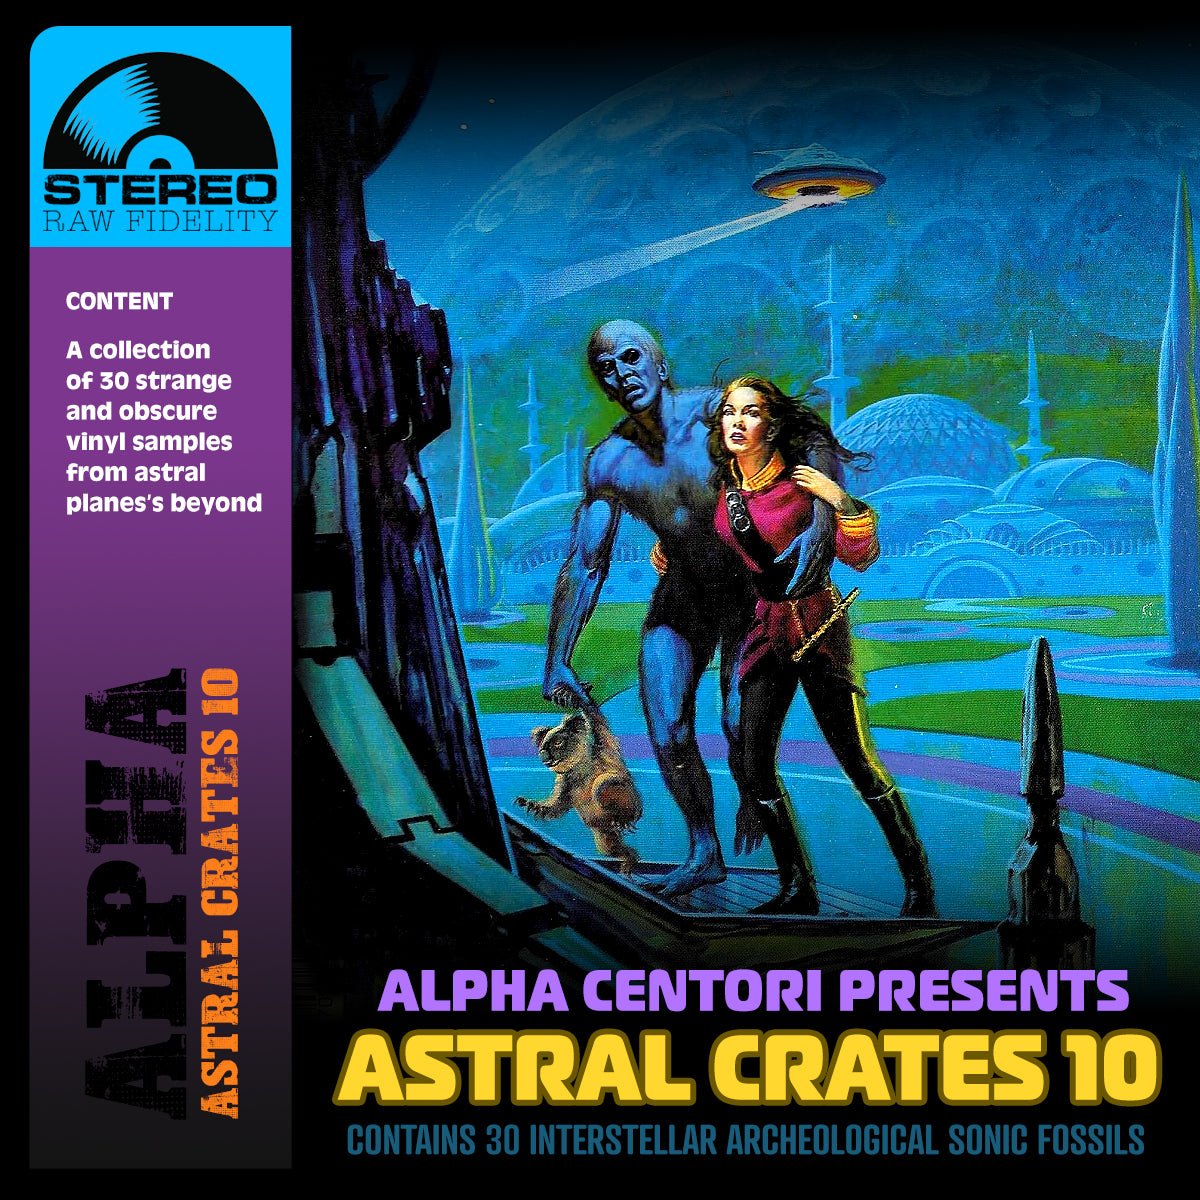 Astral Crates 10